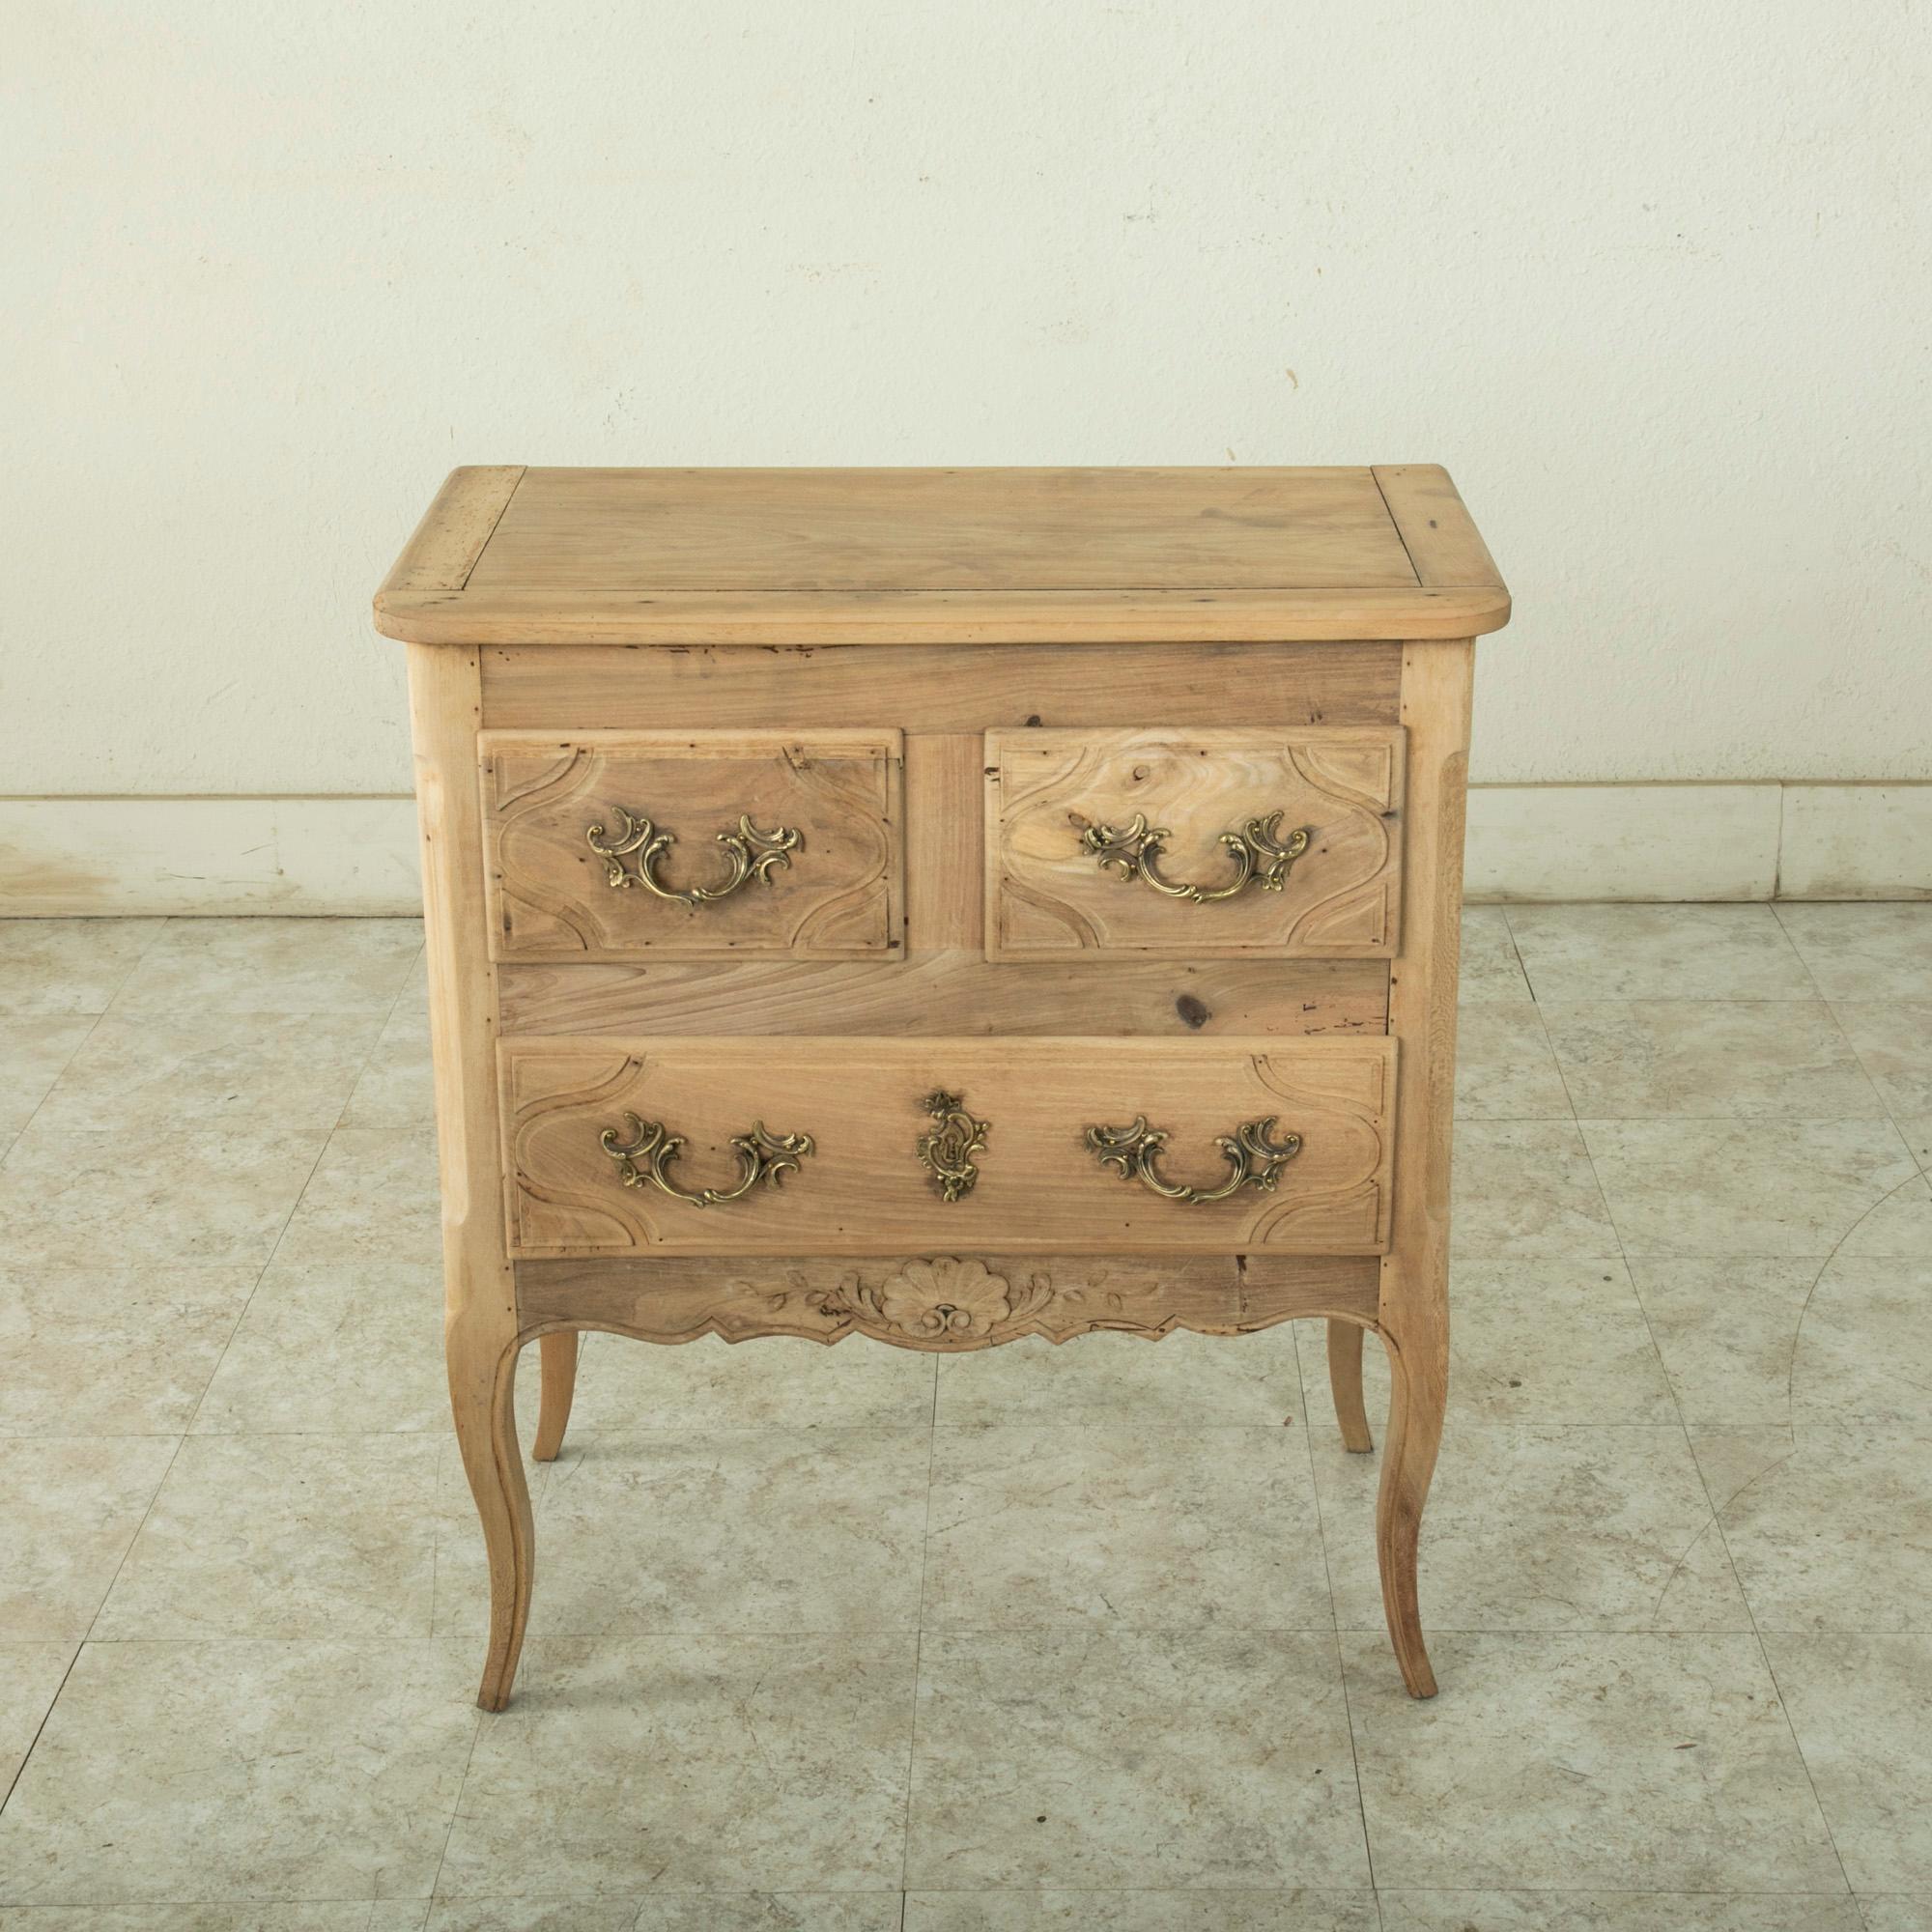 This small scale early twentieth century French Louis XV style beech wood commode or chest features hand carved details of gadrooning leaves and a central shell on its lower apron. Three drawers of dovetail construction feature symmetrical fronts